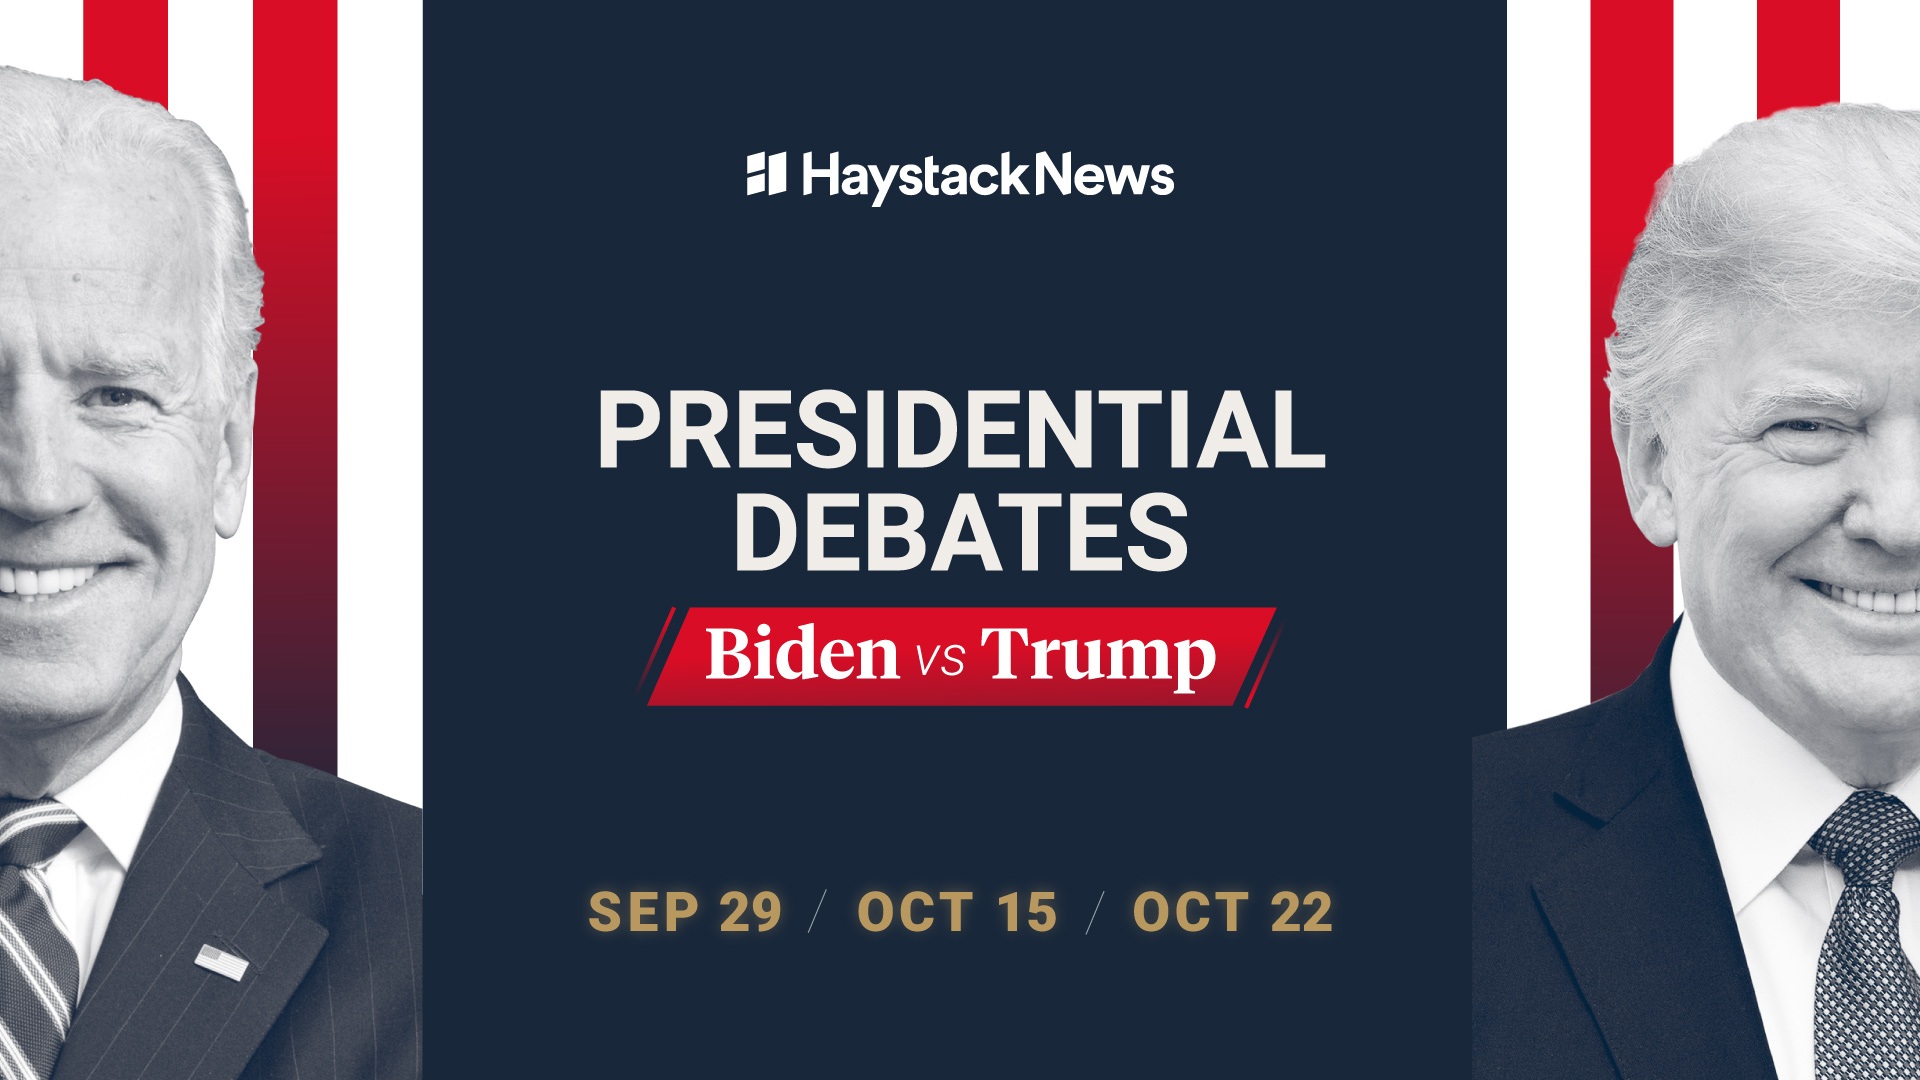 Haystack News Launches New Streaming Channels for the Presidential Debates